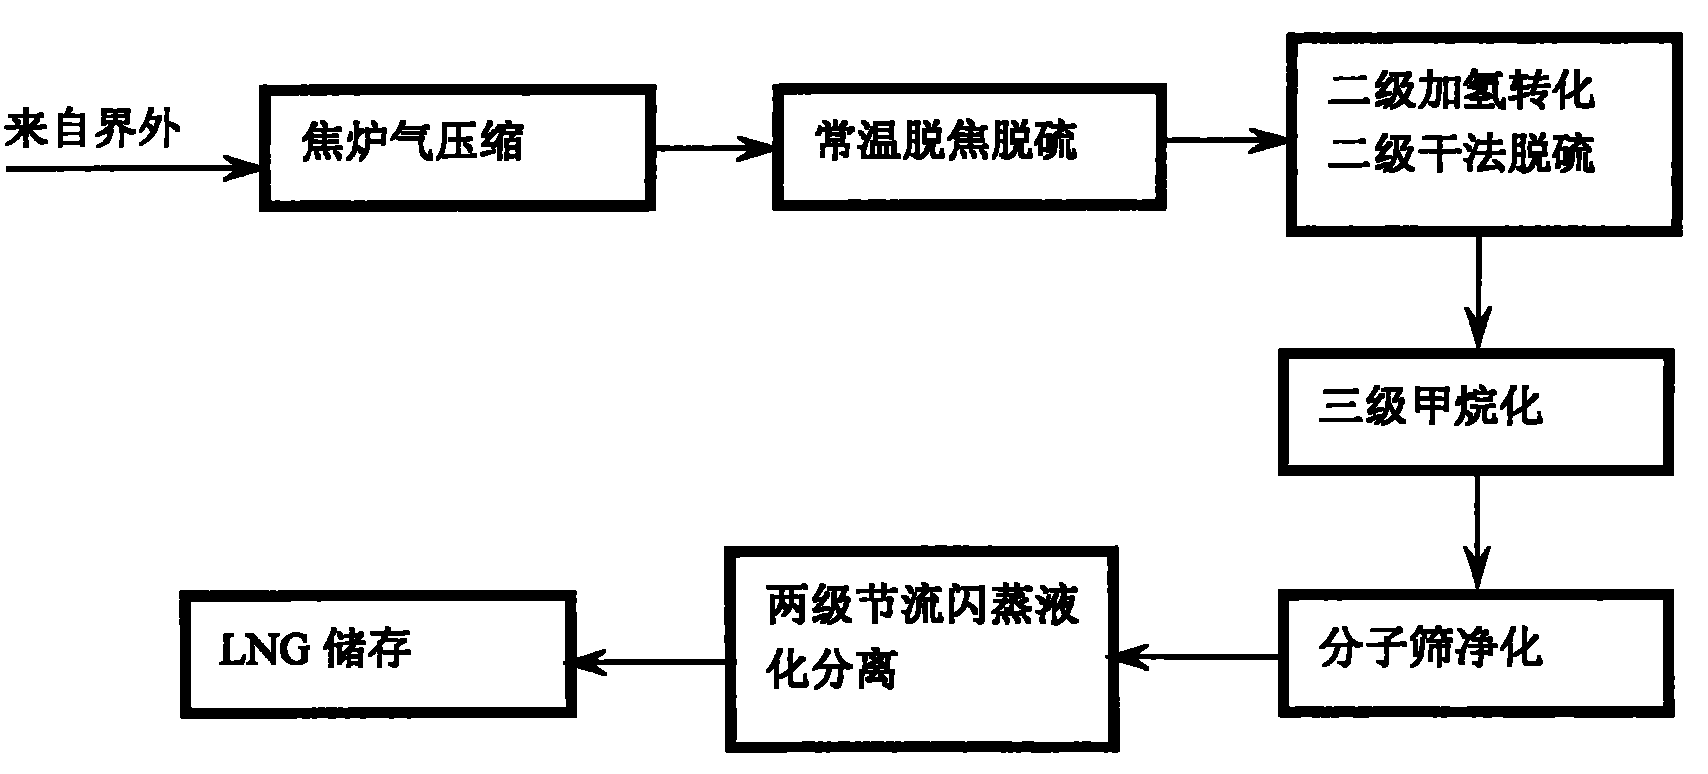 Process method for preparing LNG from coke oven tail gas